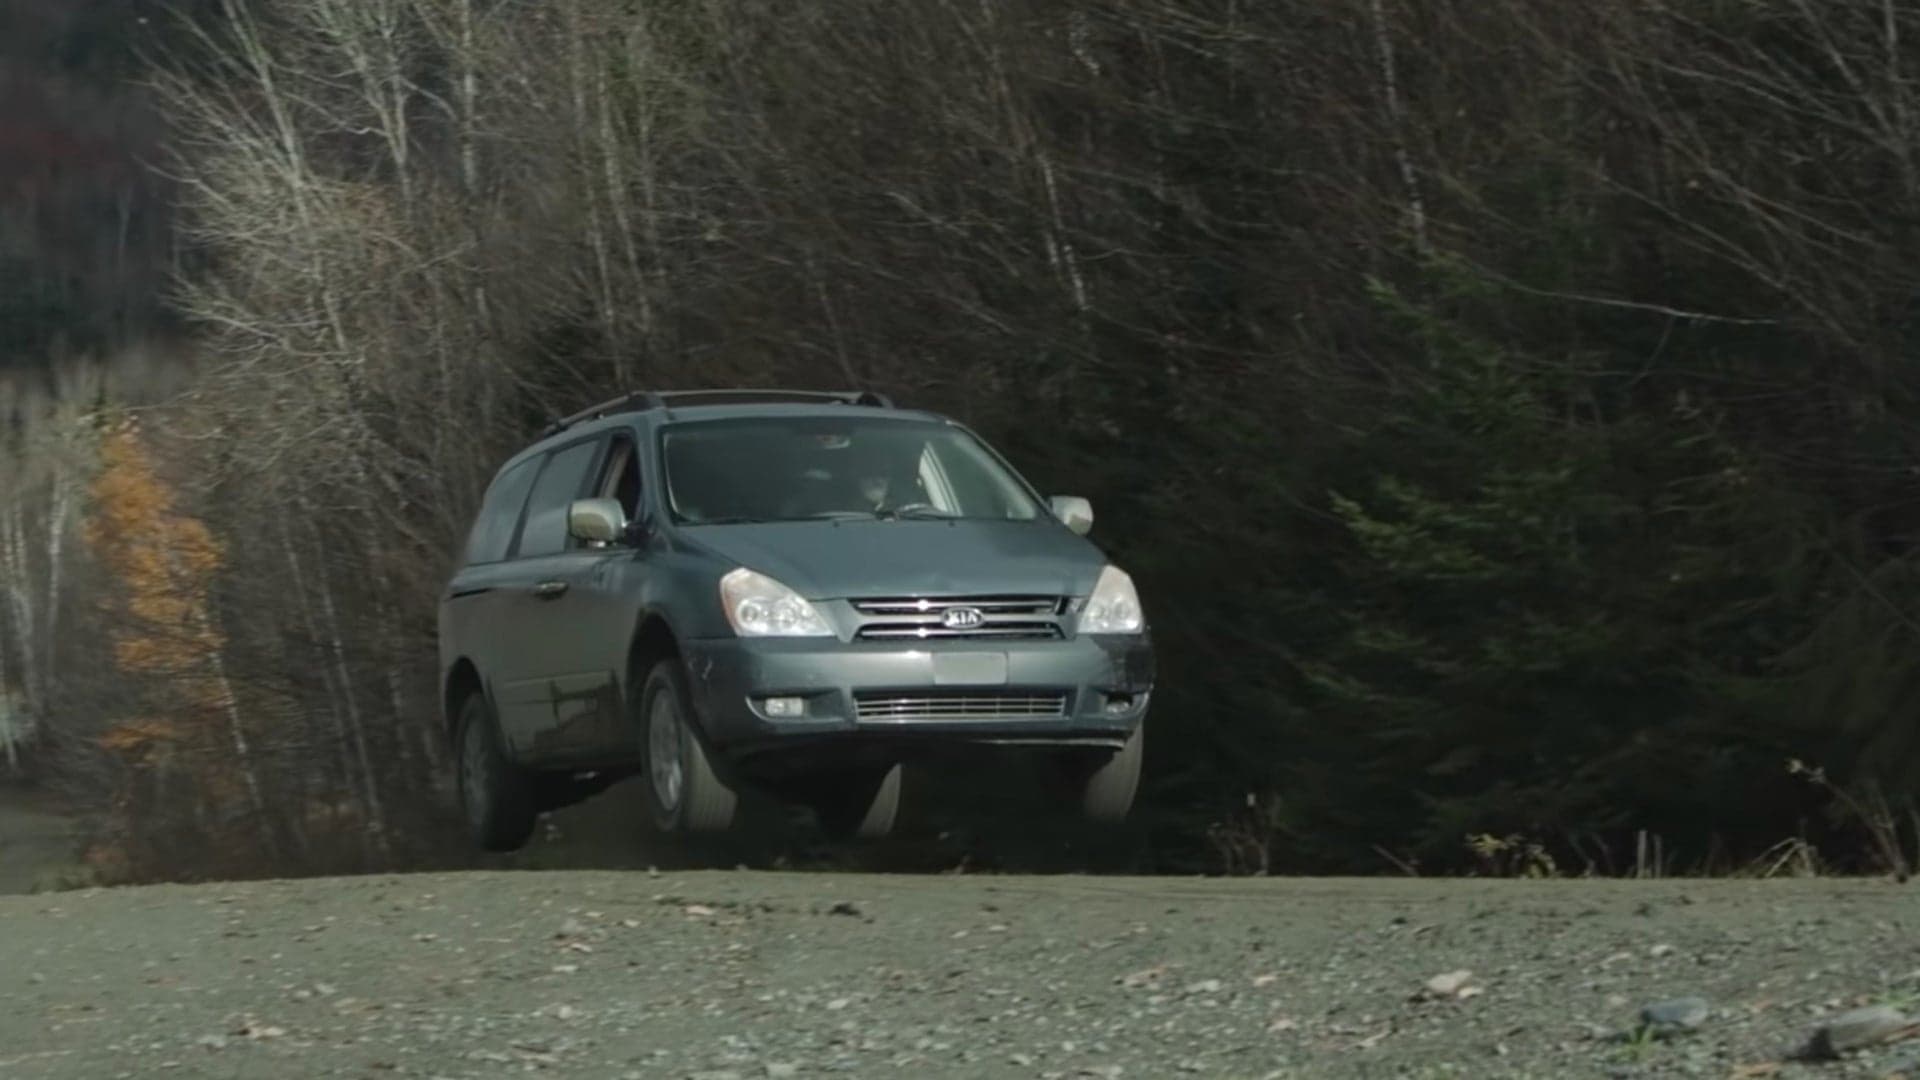 Can a 2005 Kia Sedona Rally? Wyatt Knox Puts It to the Test at the Team O’Neil Proving Grounds